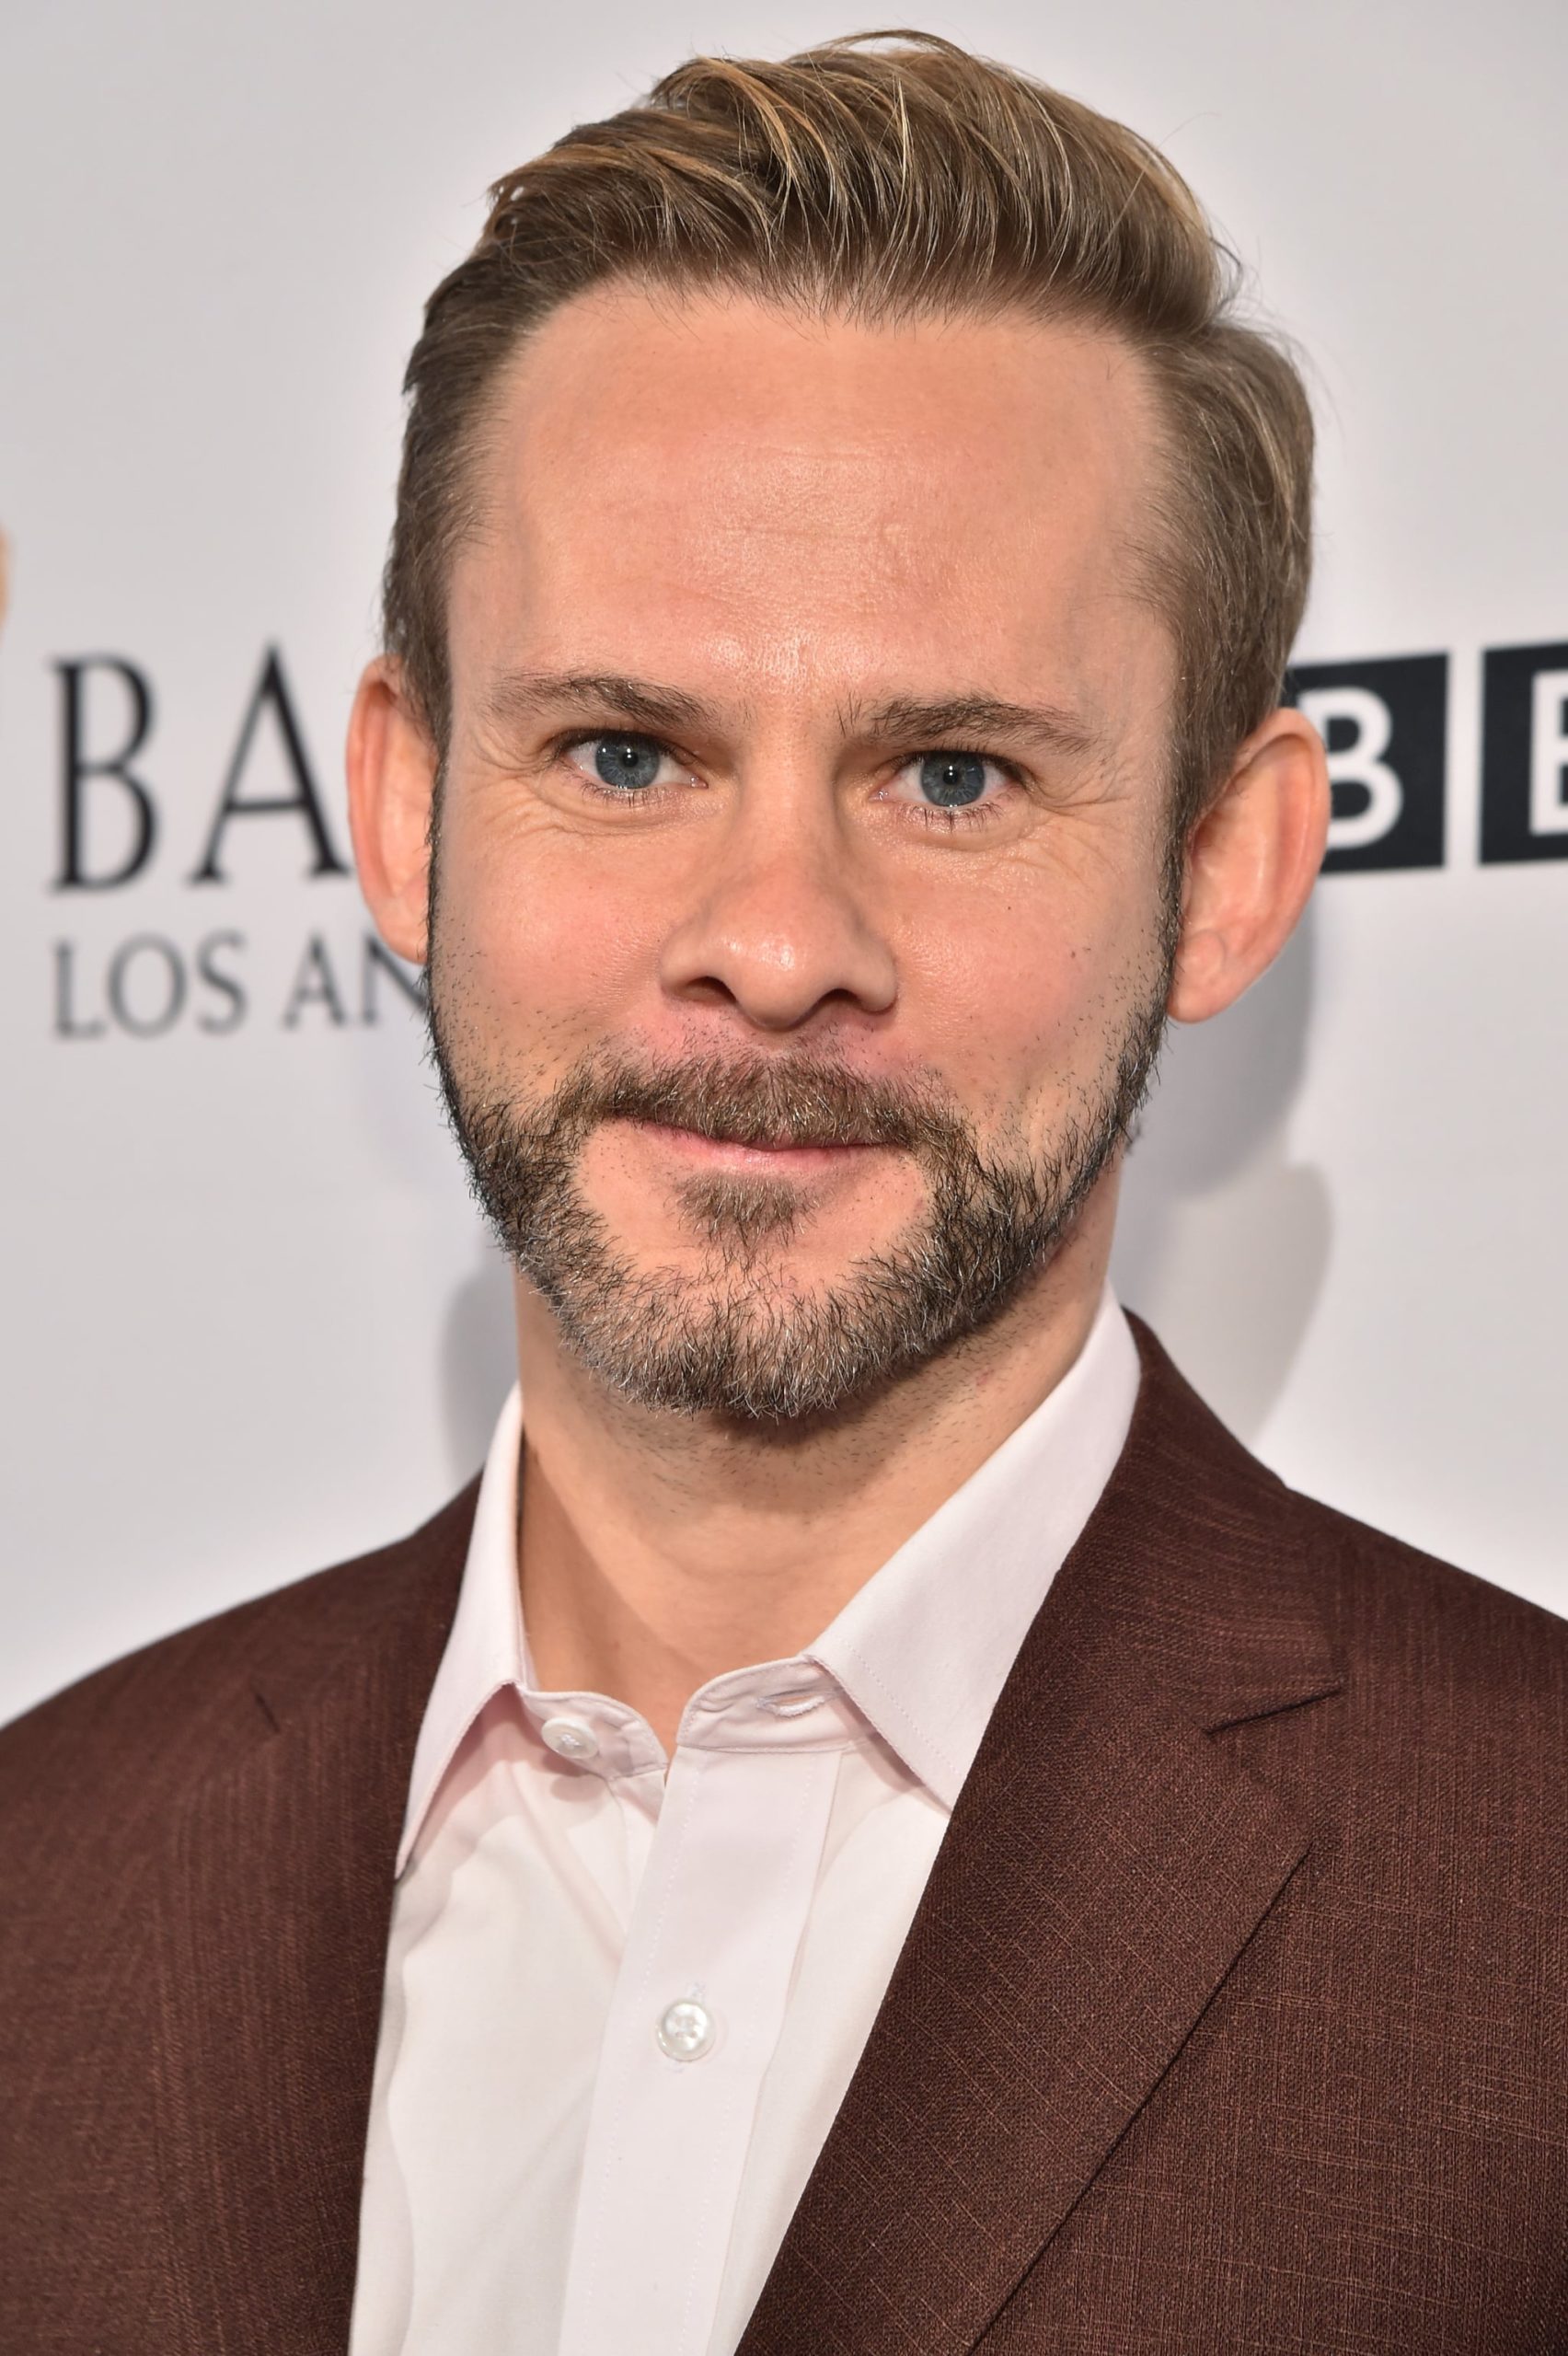 Dominic-Monaghan-as-Beaumont